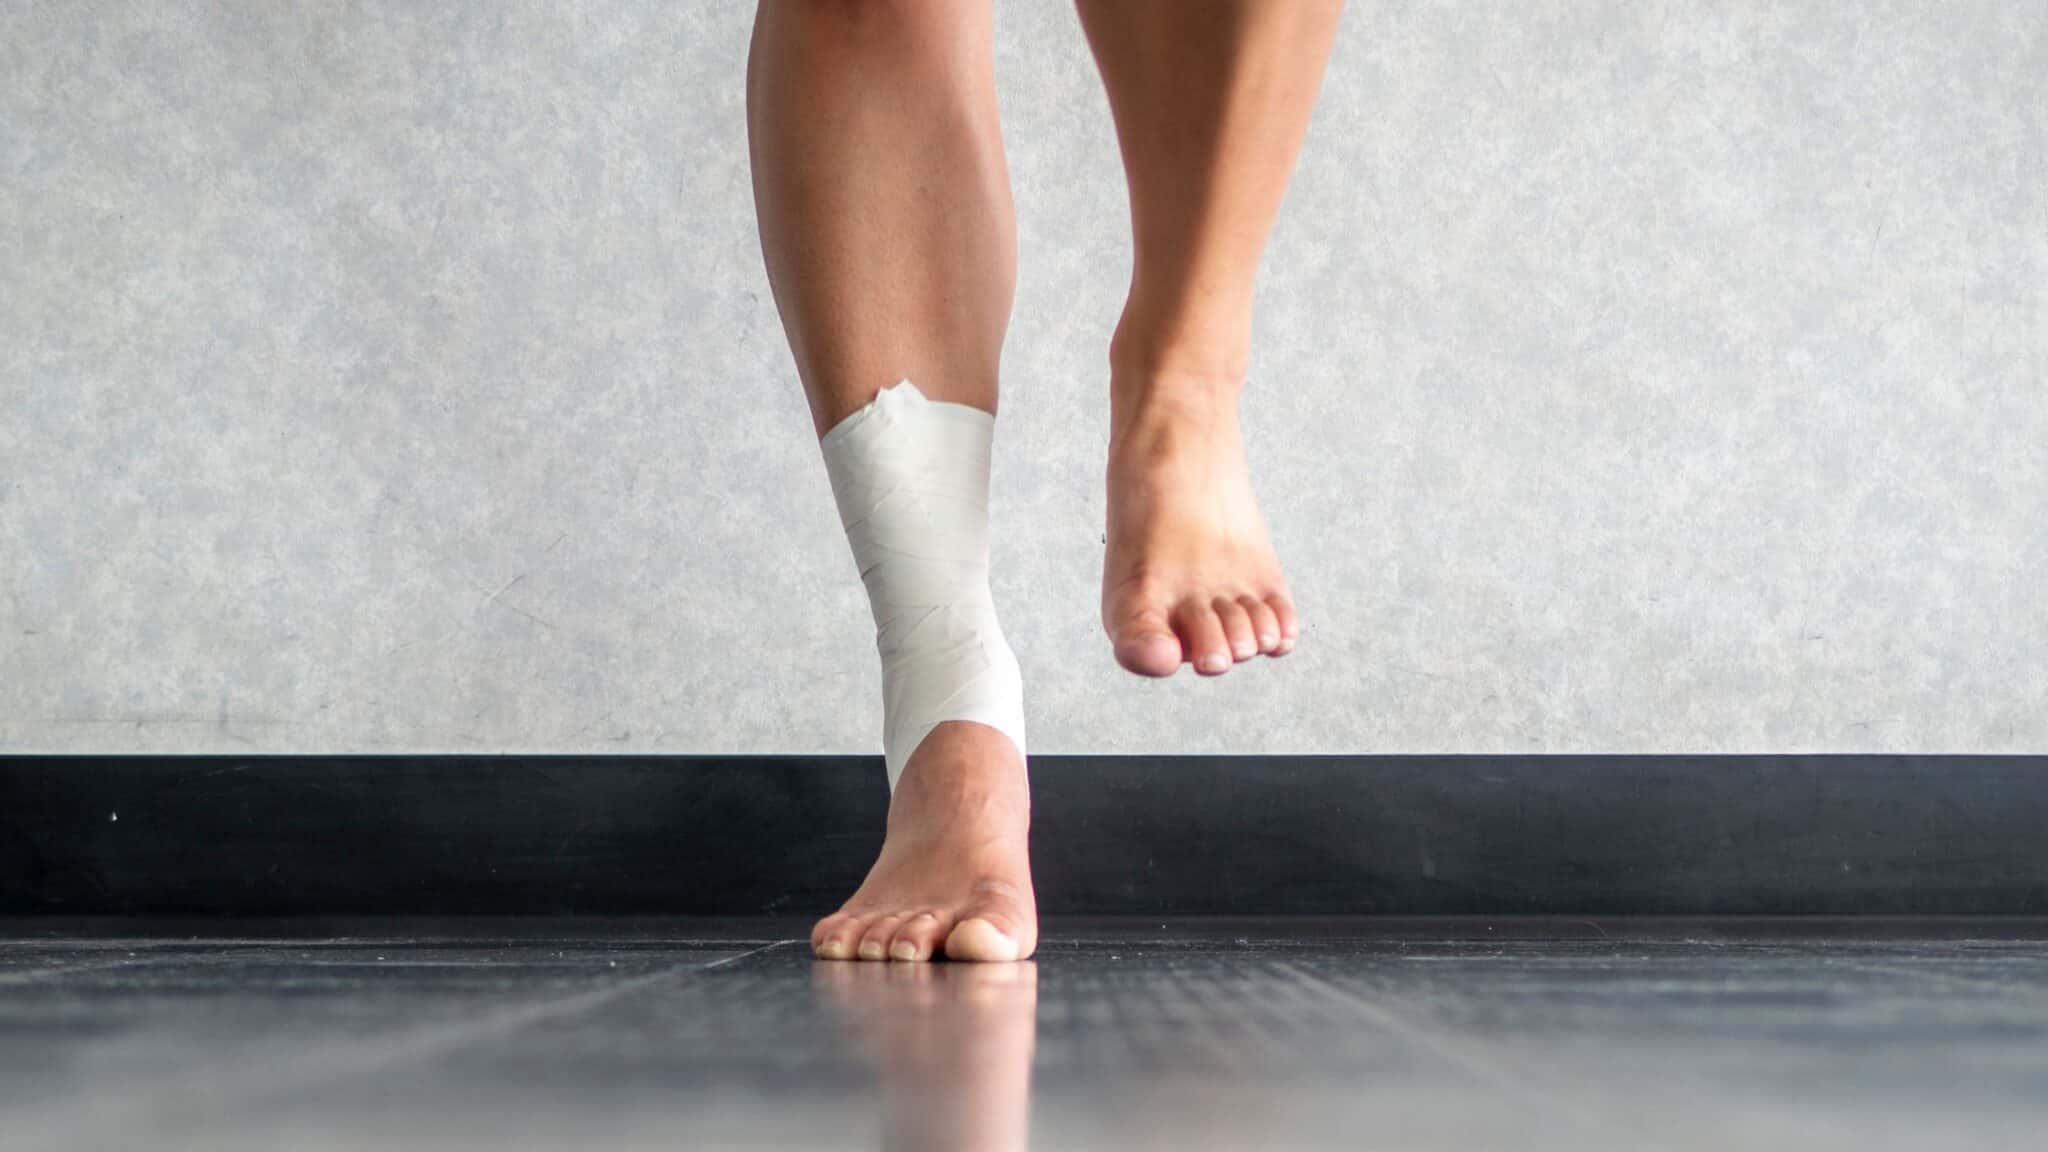 A person stands on his right leg, with his ankle bandaged as if he had suffered an injury.